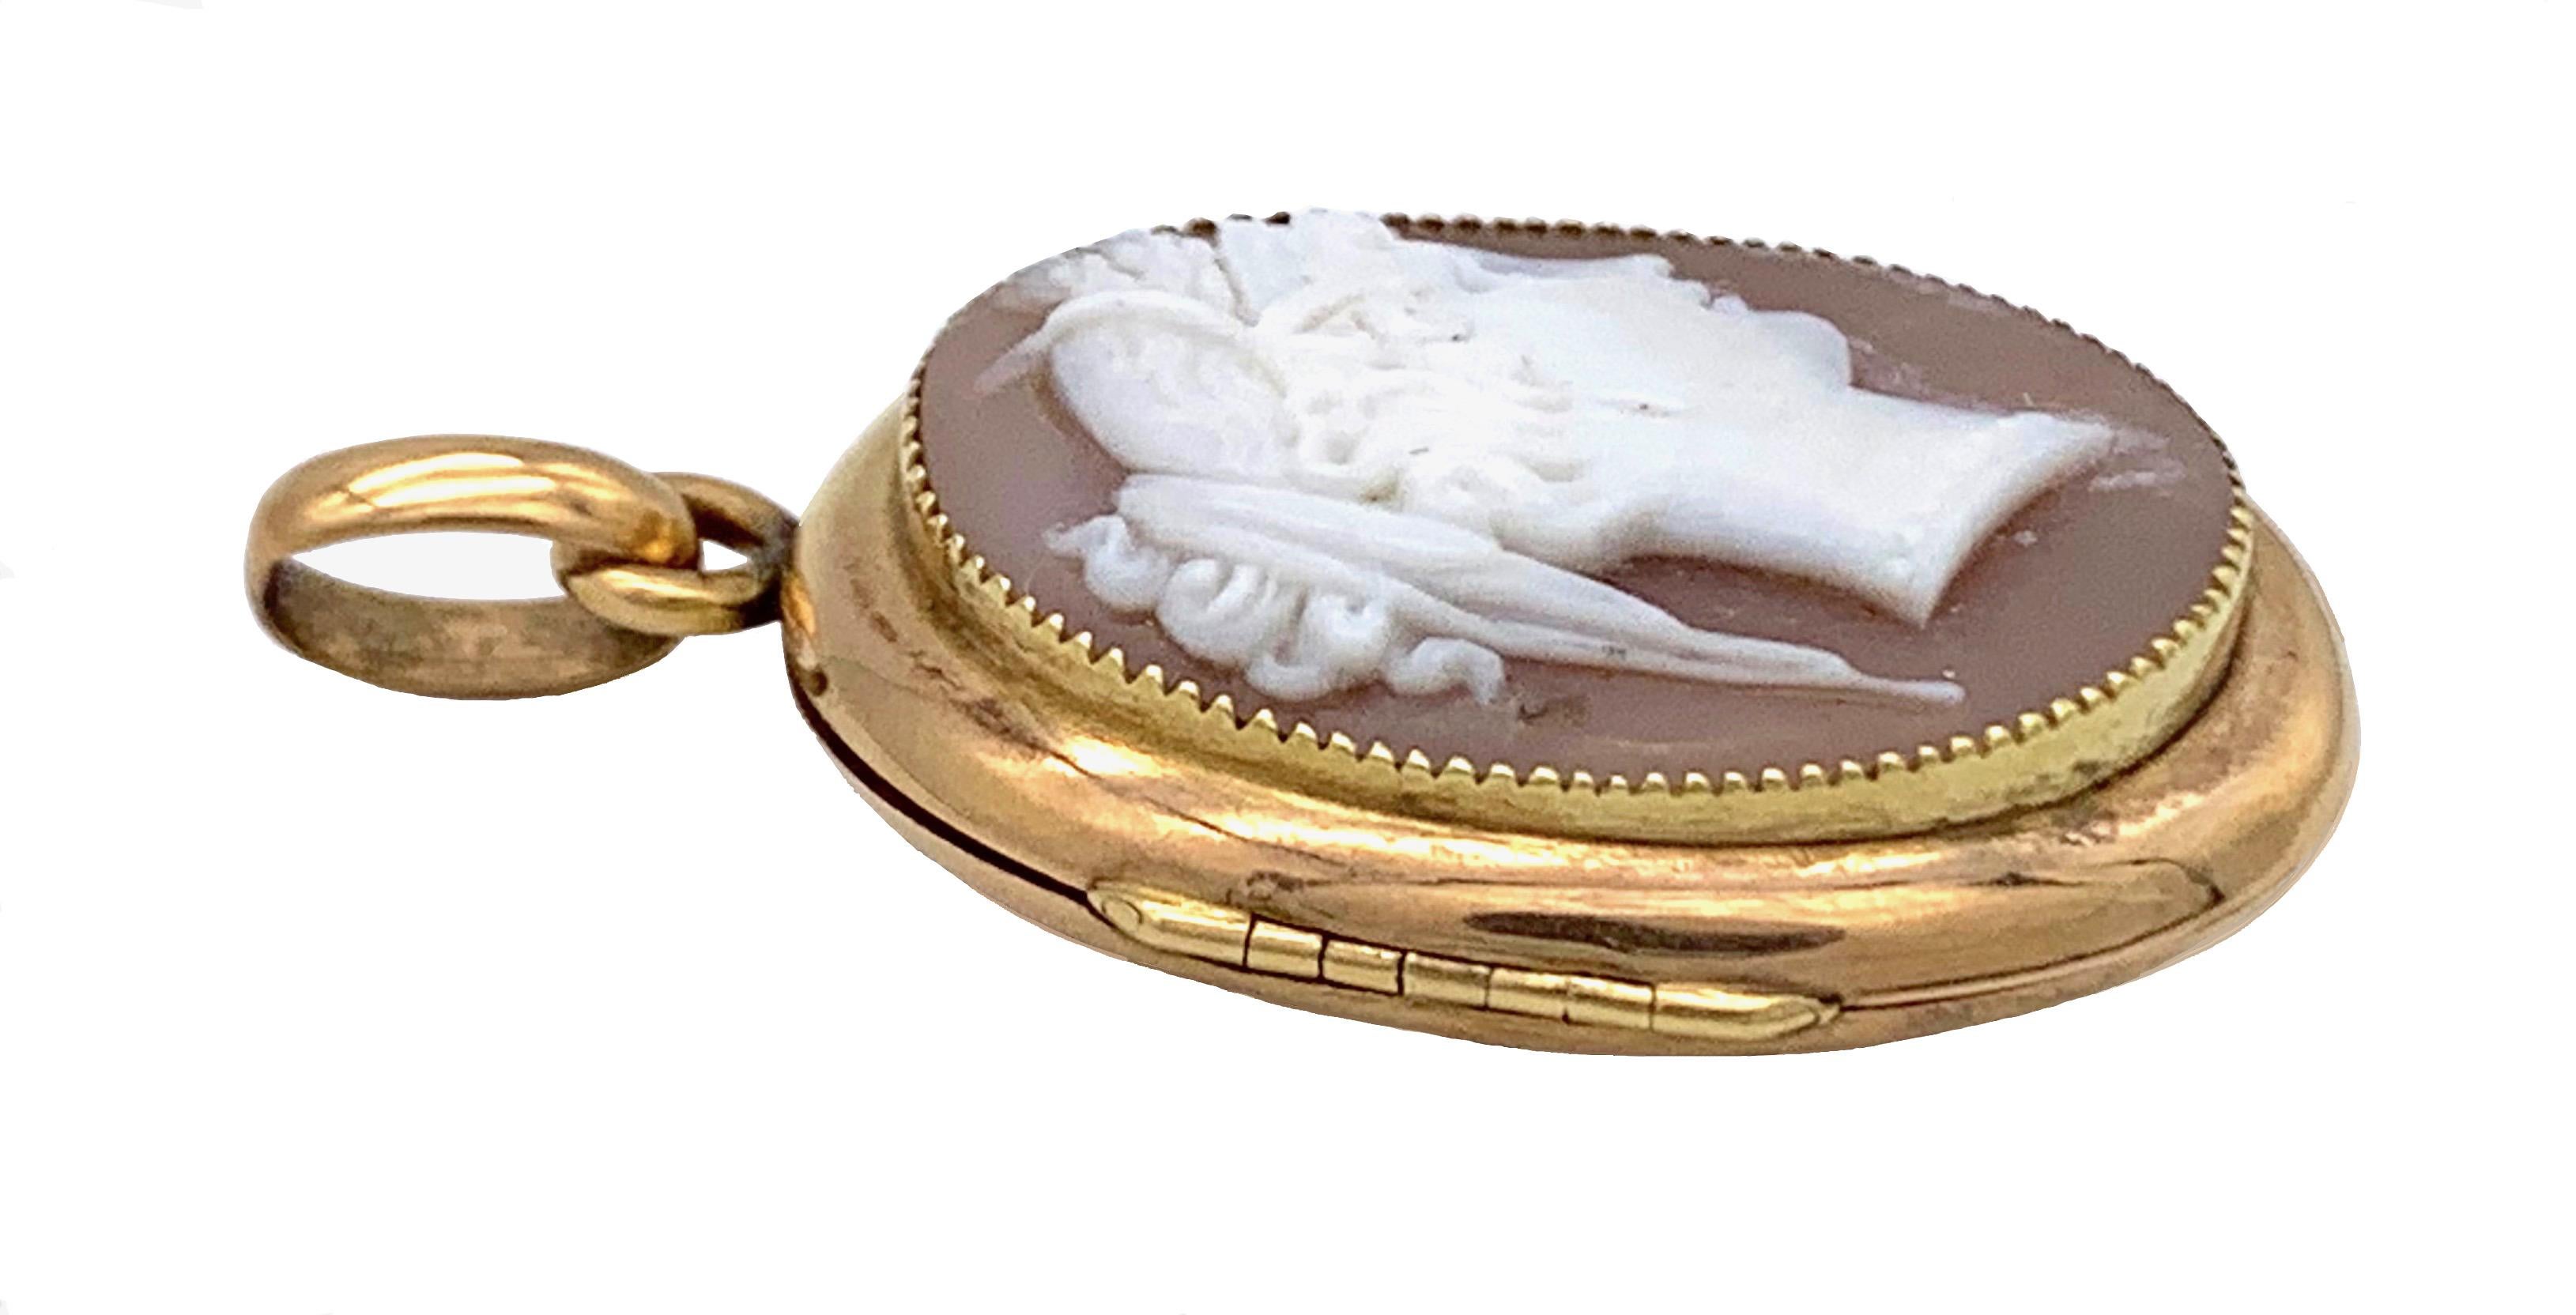 This elegant locket is set with a finely carved oval shell cameo of the profile of a young woman in the antique manner. The cameo has been mounted in a locket made out of 14 karat Gold.